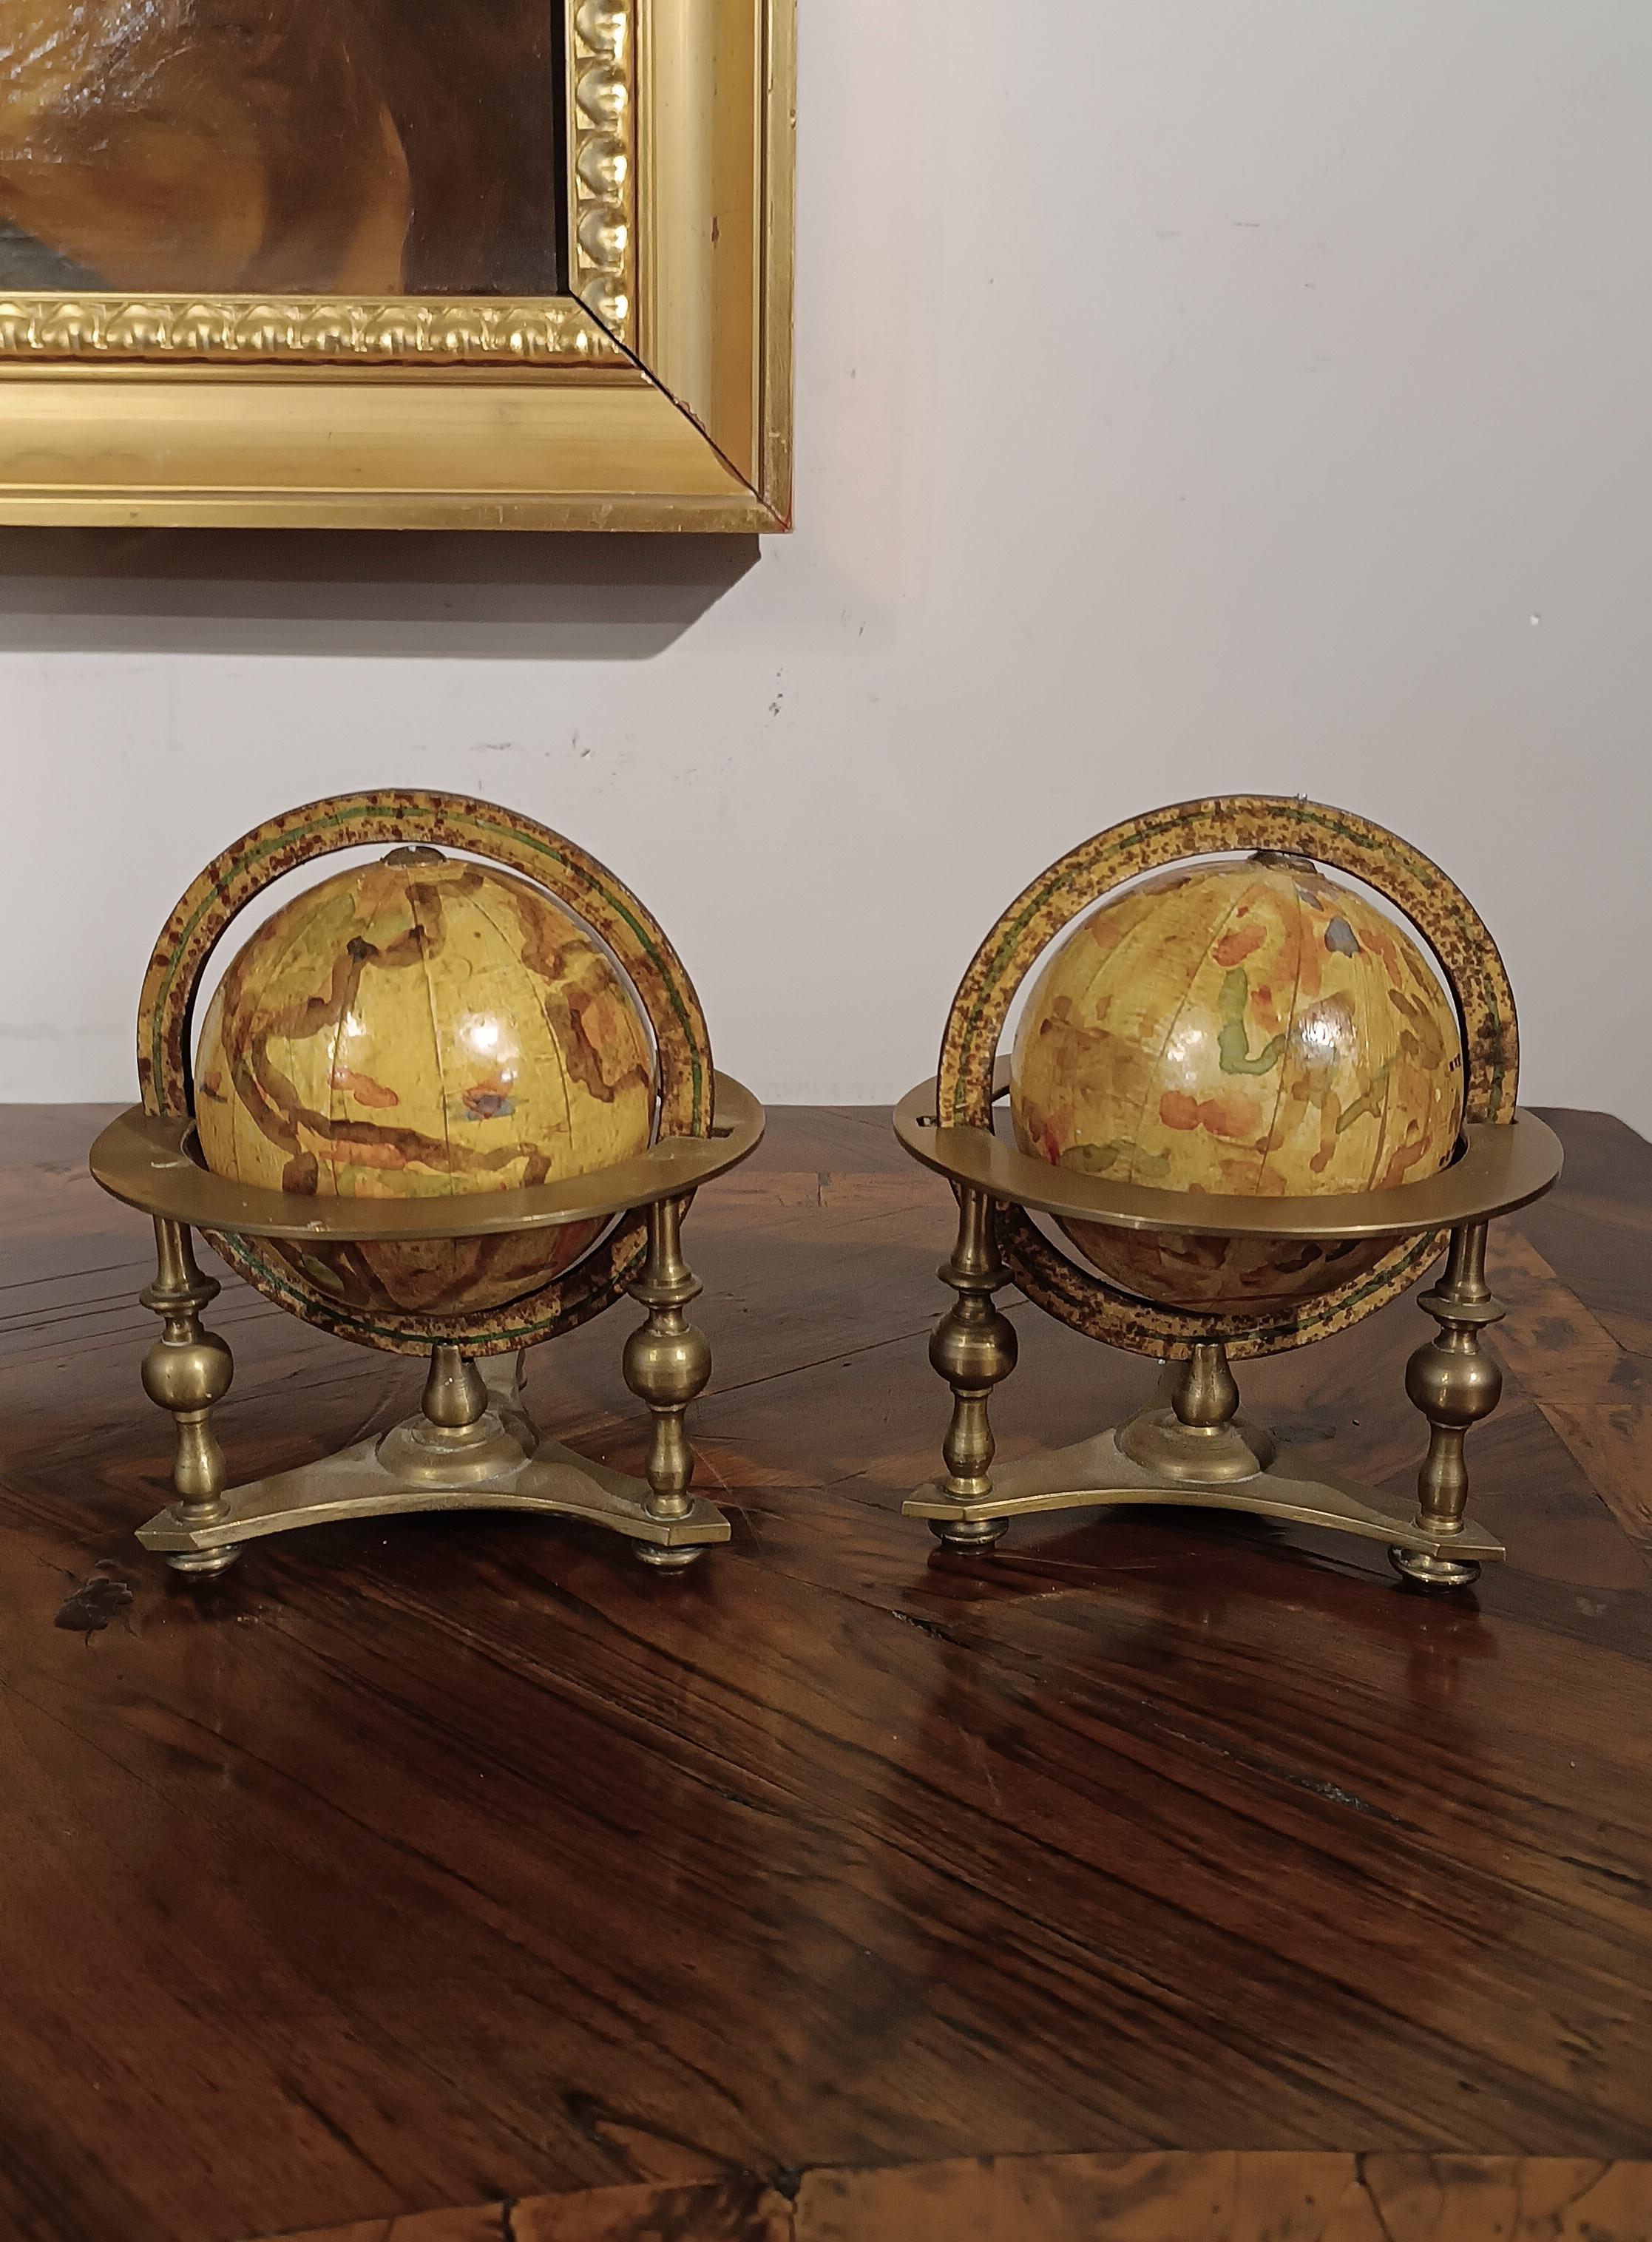 Unique and fascinating pair of small globes, made with artisanal care by Italian manufacturers in the 19th century and hand painted on fine paper. These small globes are mounted on a solid brass base, equipped with three legs and a pedestal, making